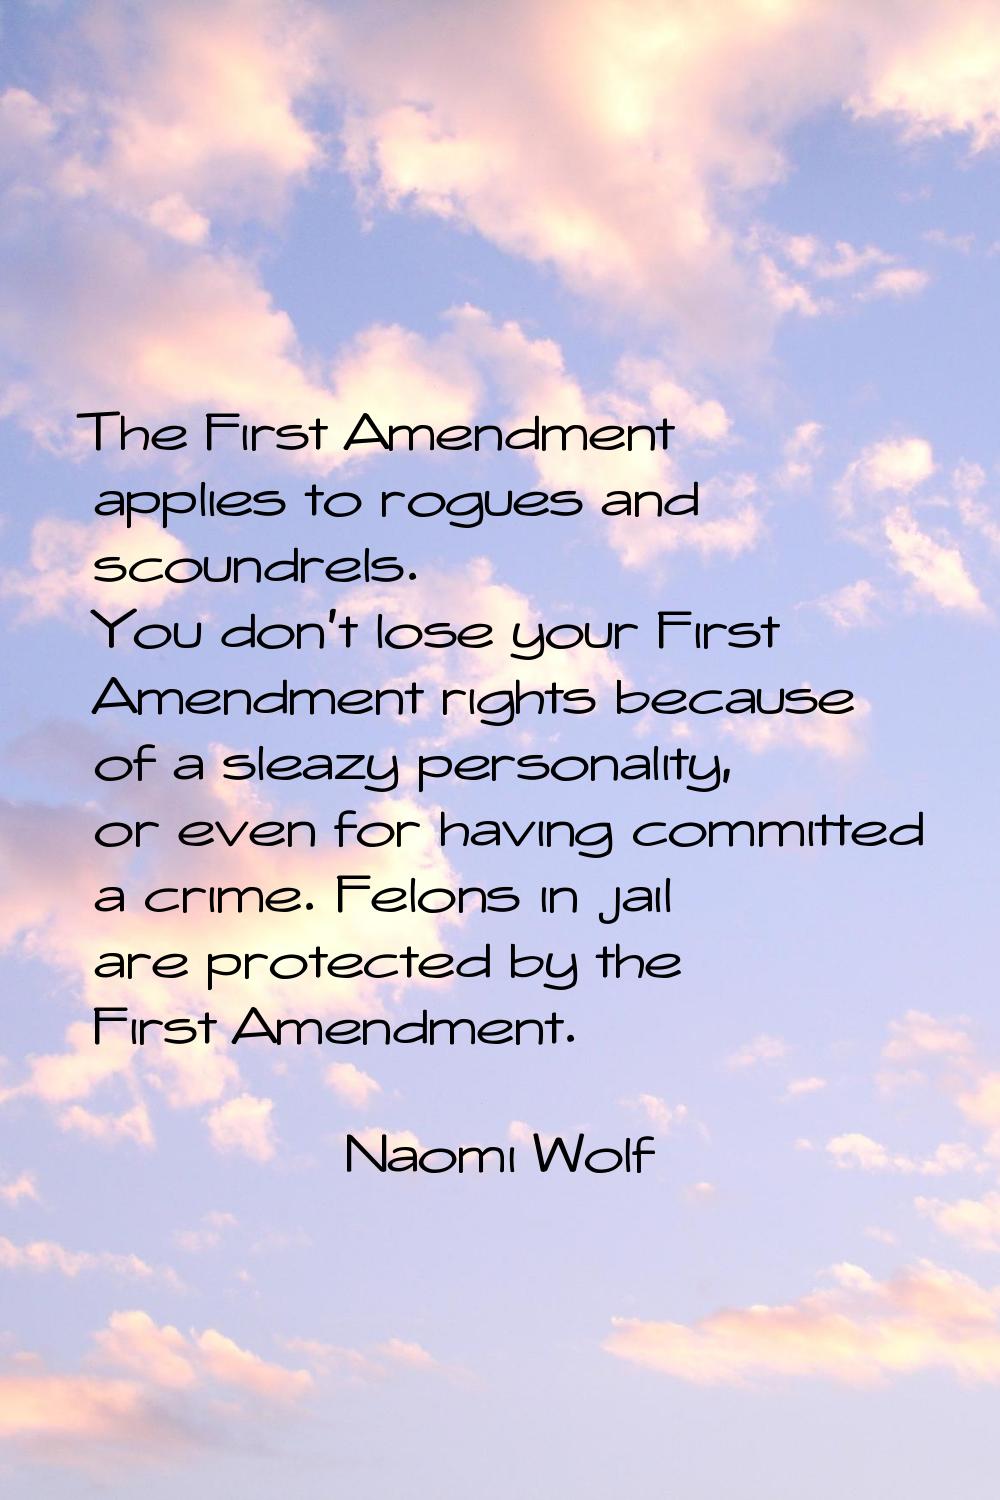 The First Amendment applies to rogues and scoundrels. You don't lose your First Amendment rights be